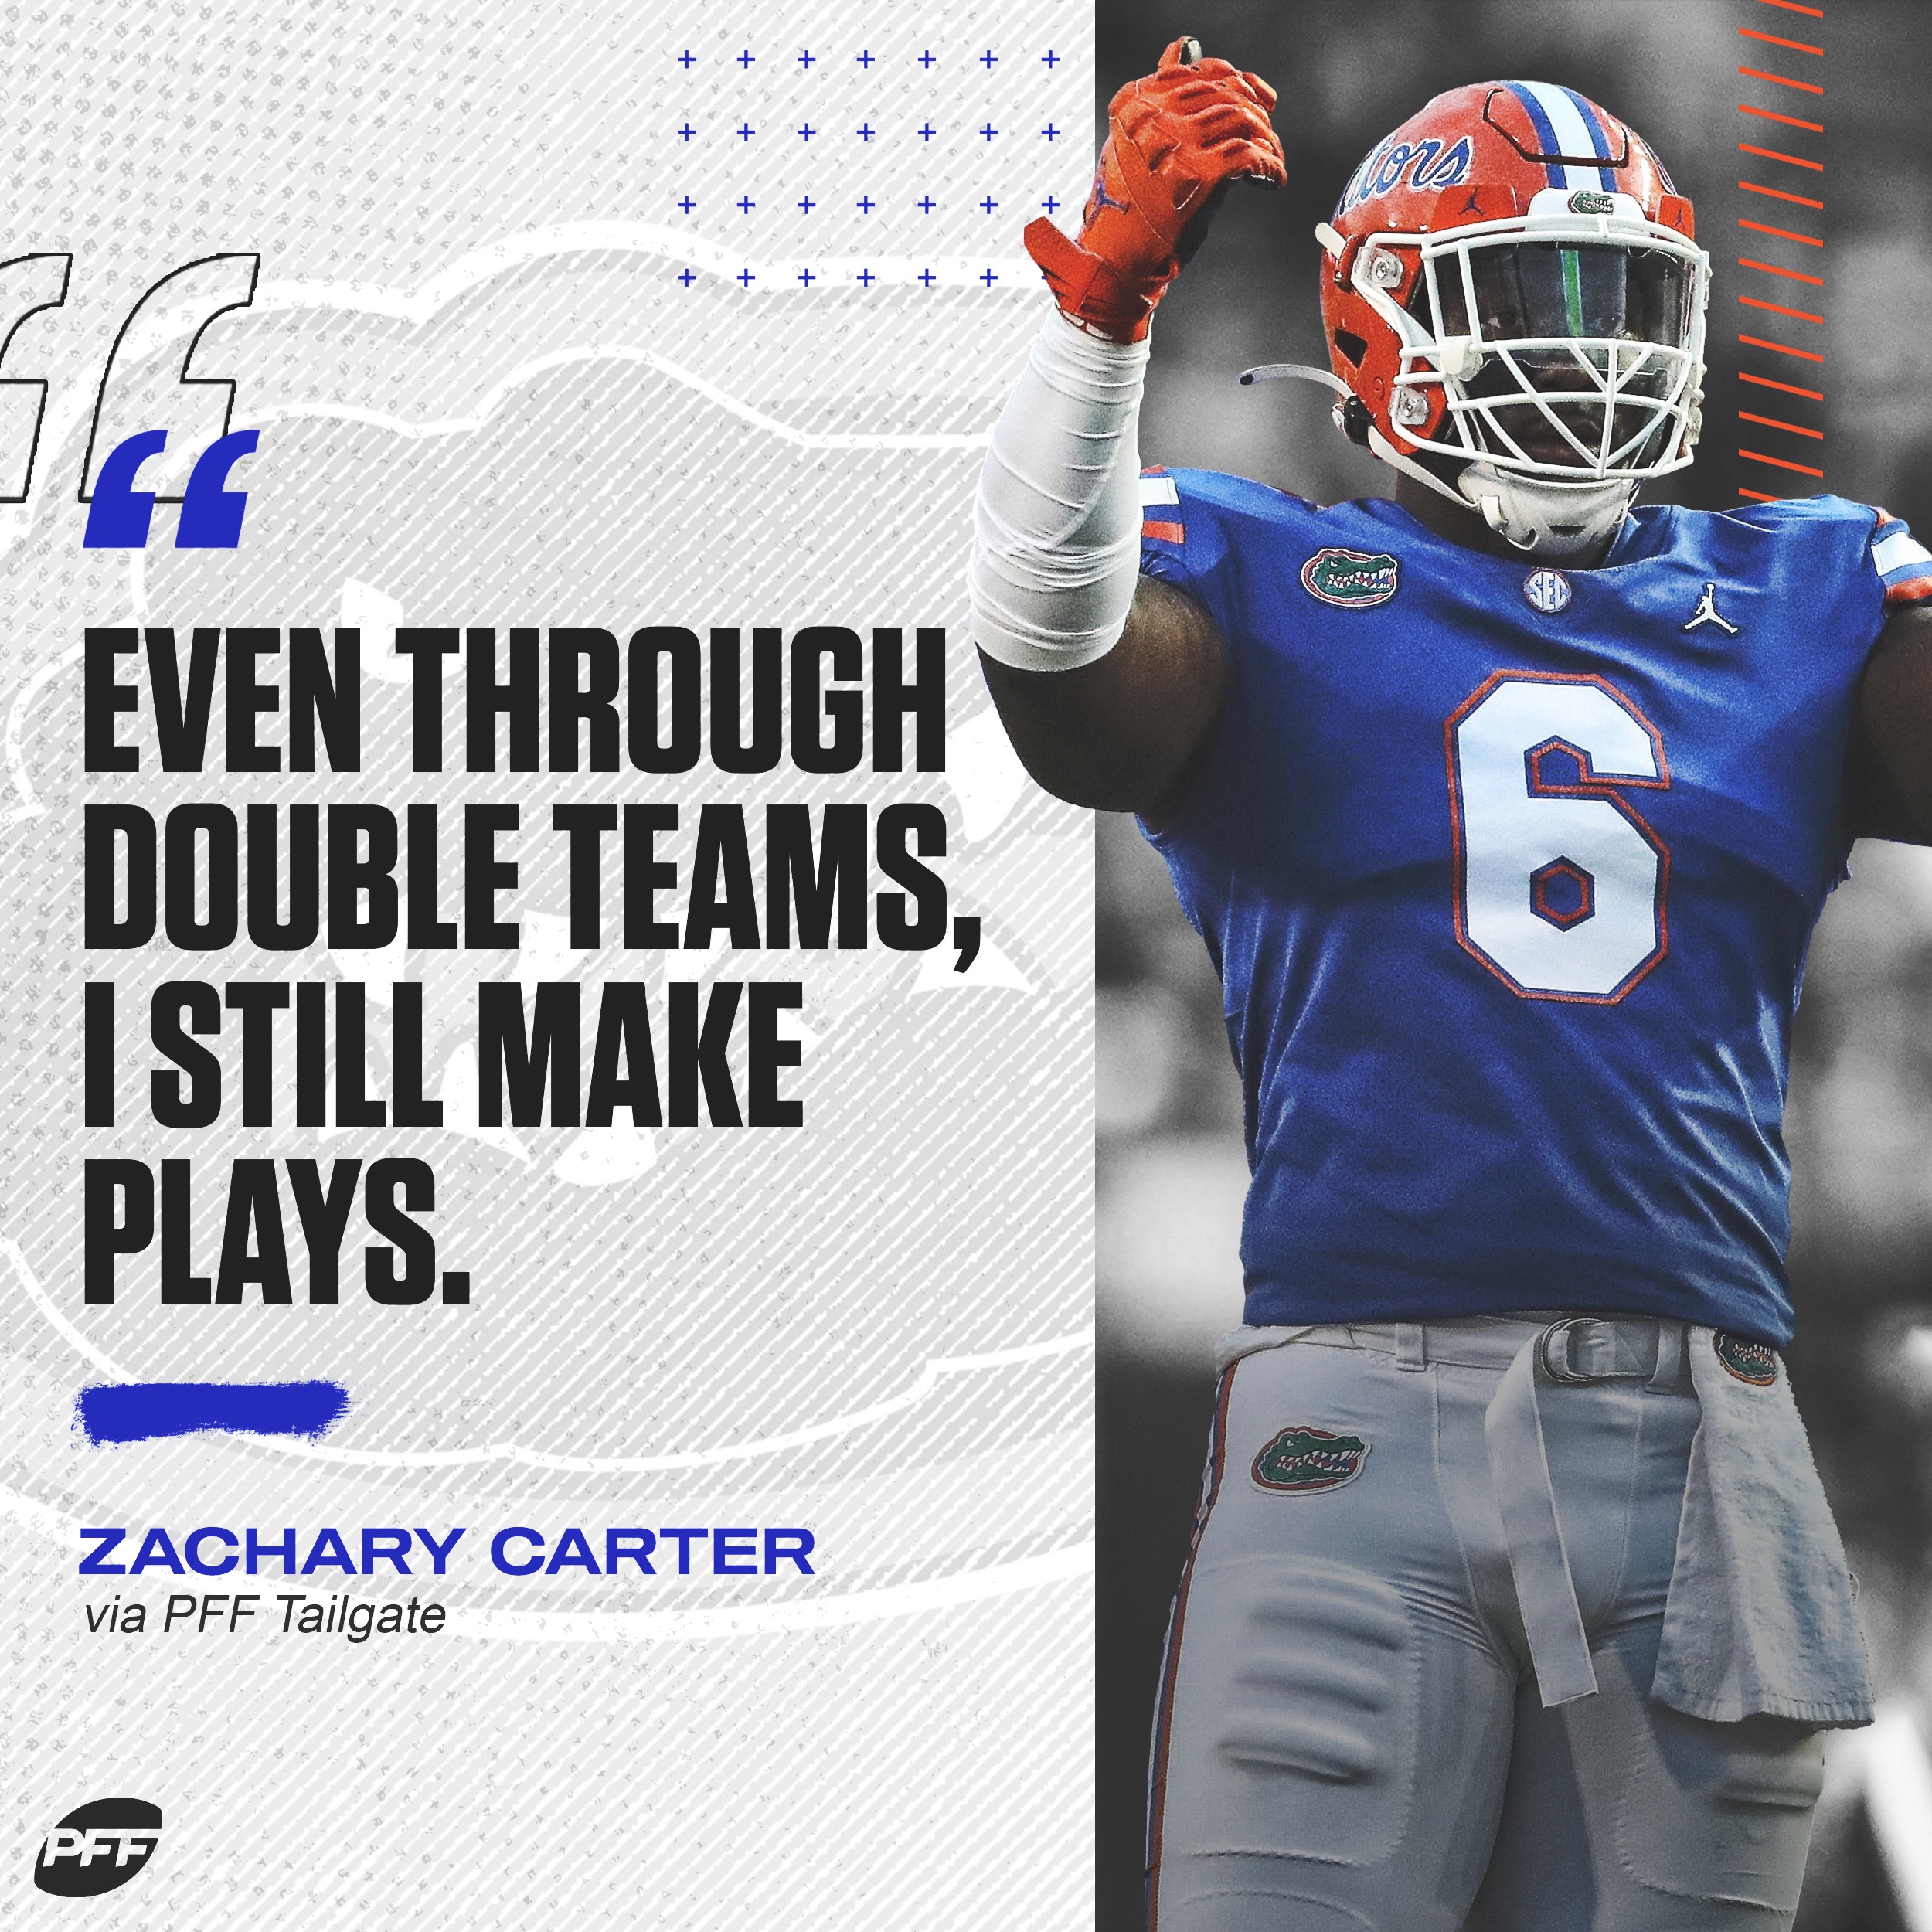 PFF Draft on Twitter: "It ain't nothin' for Zachary Carter 🐊⛓ @GatorsFB  https://t.co/Qn6a0nXWPc" / Twitter